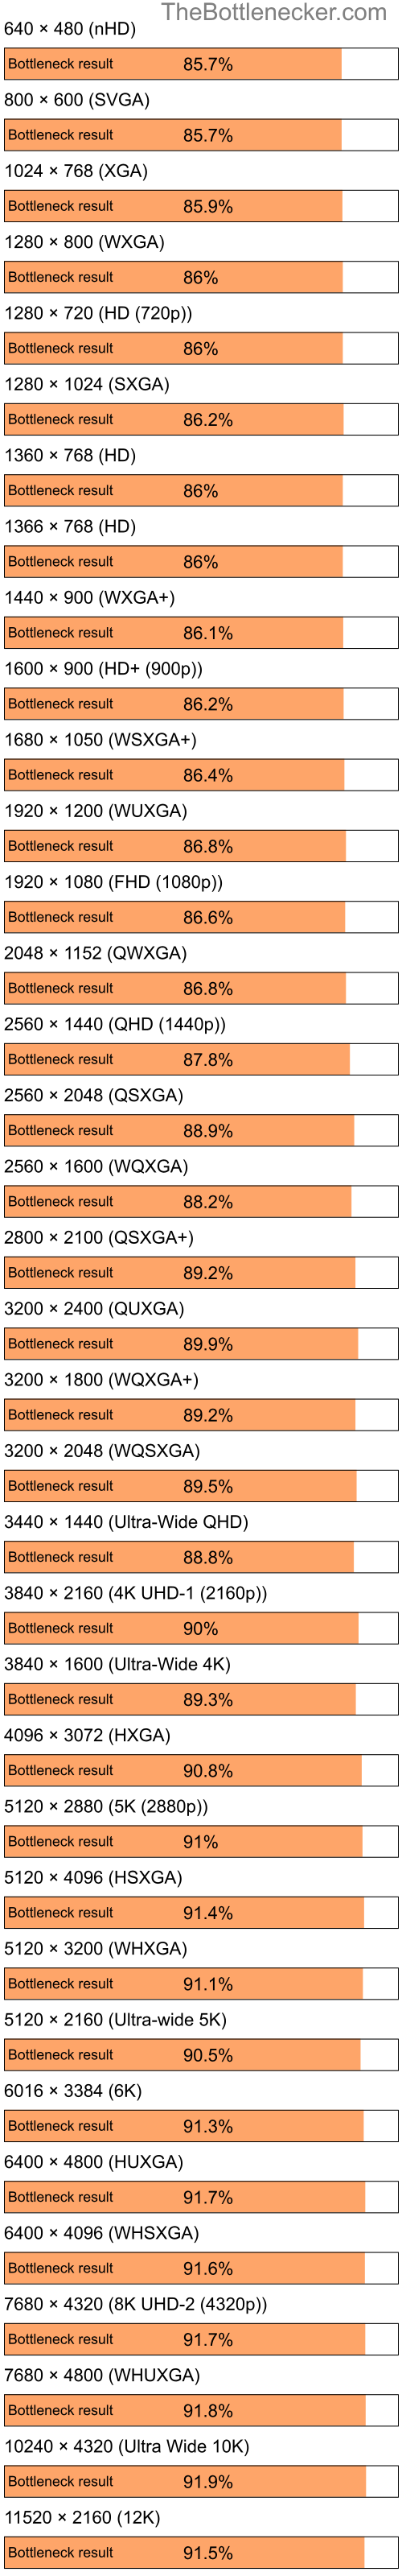 Bottleneck results by resolution for Intel Celeron M 420 and NVIDIA GeForce Go 6150 in Graphic Card Intense Tasks